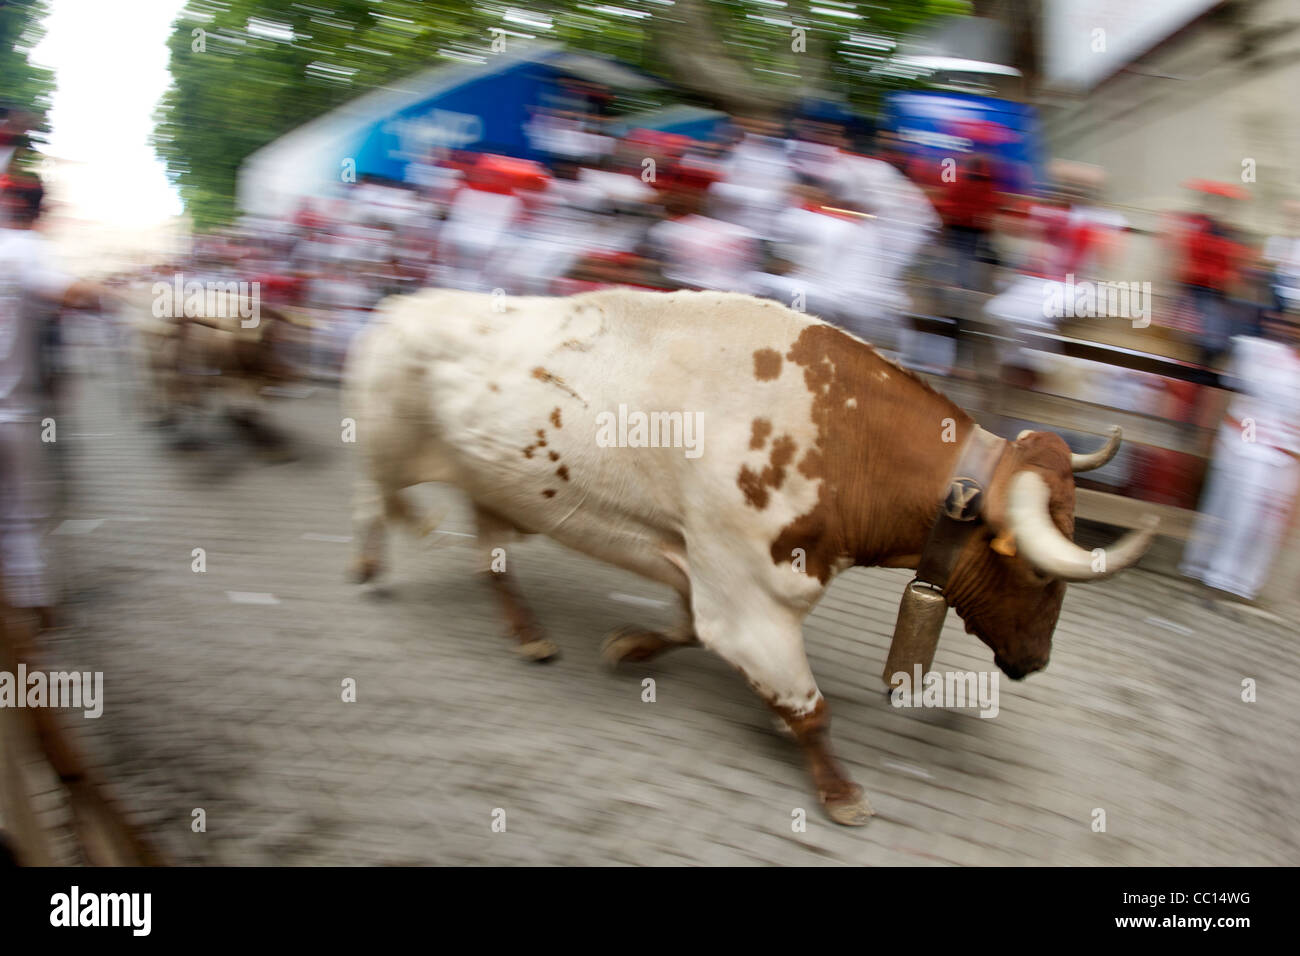 Steers running during the annual festival of San Fermin (aka the running of the bulls) in Pamplona, Spain. Stock Photo